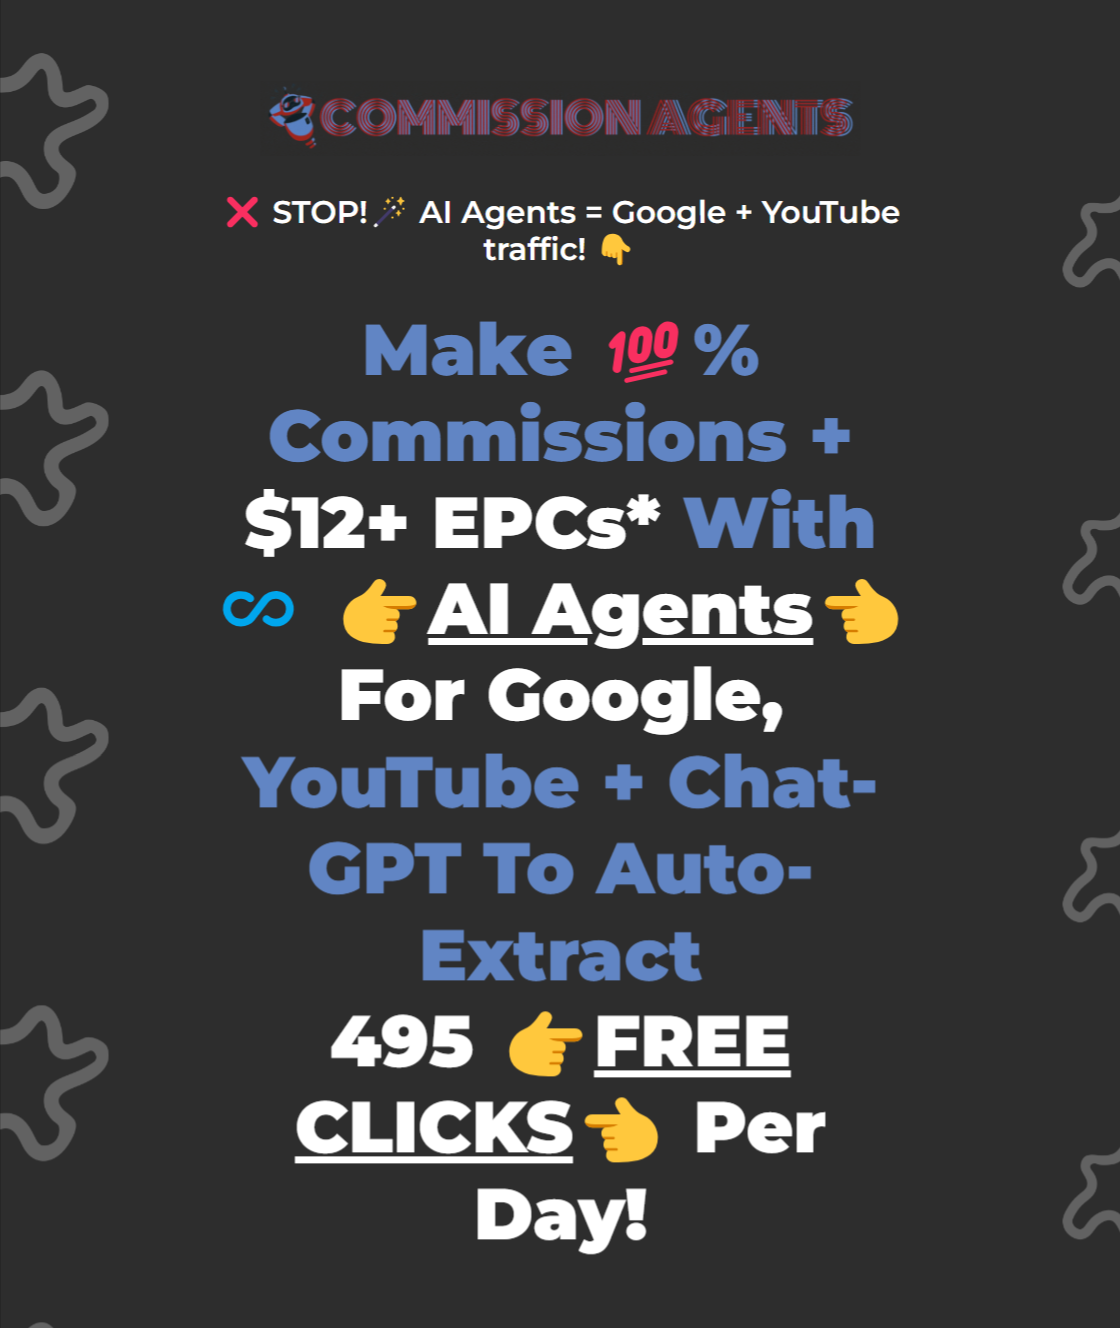 Google Meets Chat GPT JV Affiliate Invite Page 2 AI Commission Agents Review - The Future of Automated Affiliate Commissions is Here. This AI gives you FREE GOOGLE + YOUTUBE TRAFFIC Using AUTOMATED GPT AGENTS.